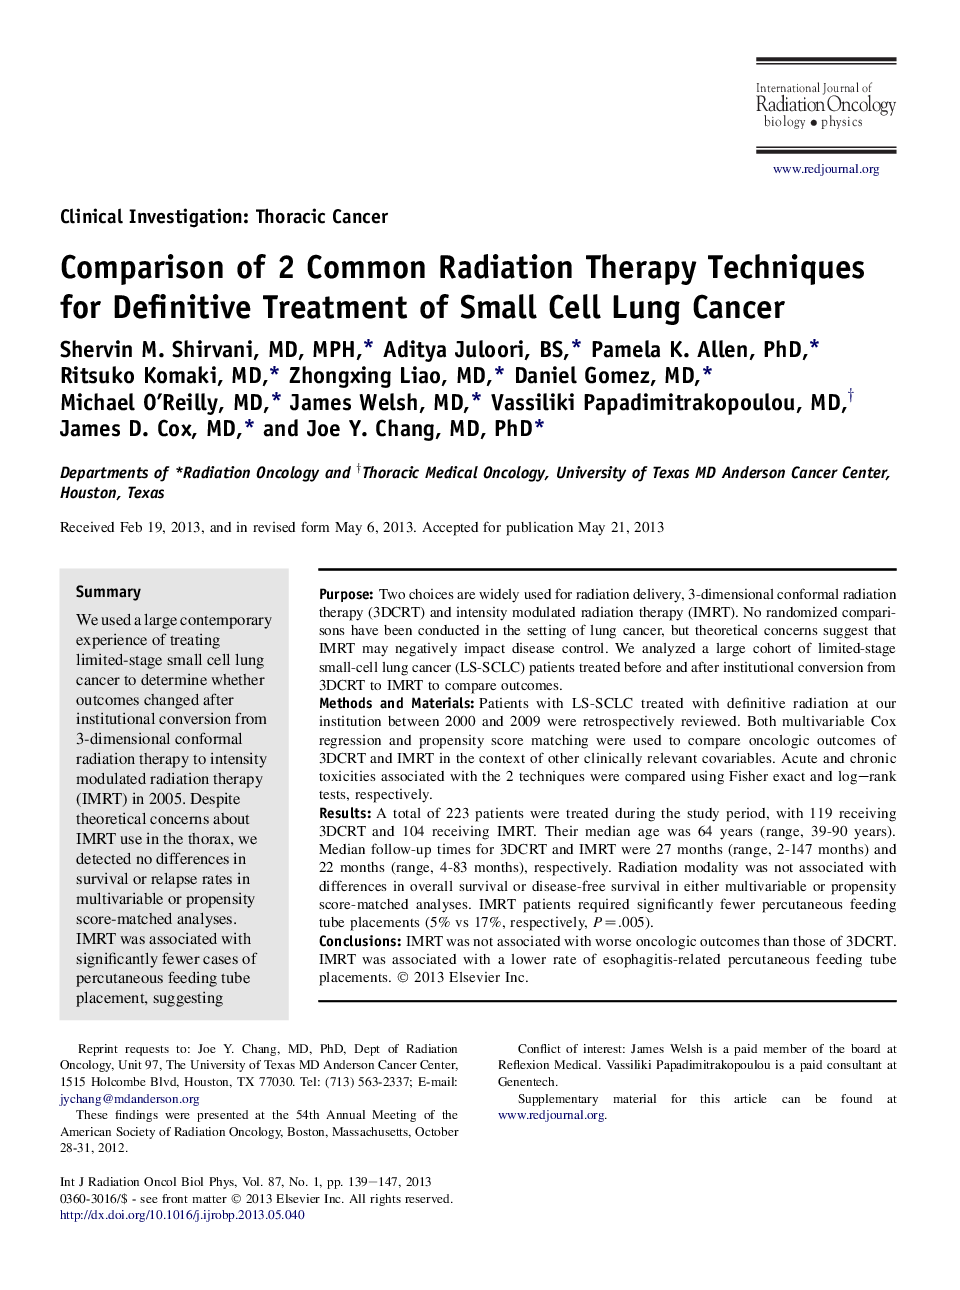 Comparison of 2 Common Radiation Therapy Techniques for Definitive Treatment of Small Cell Lung Cancer